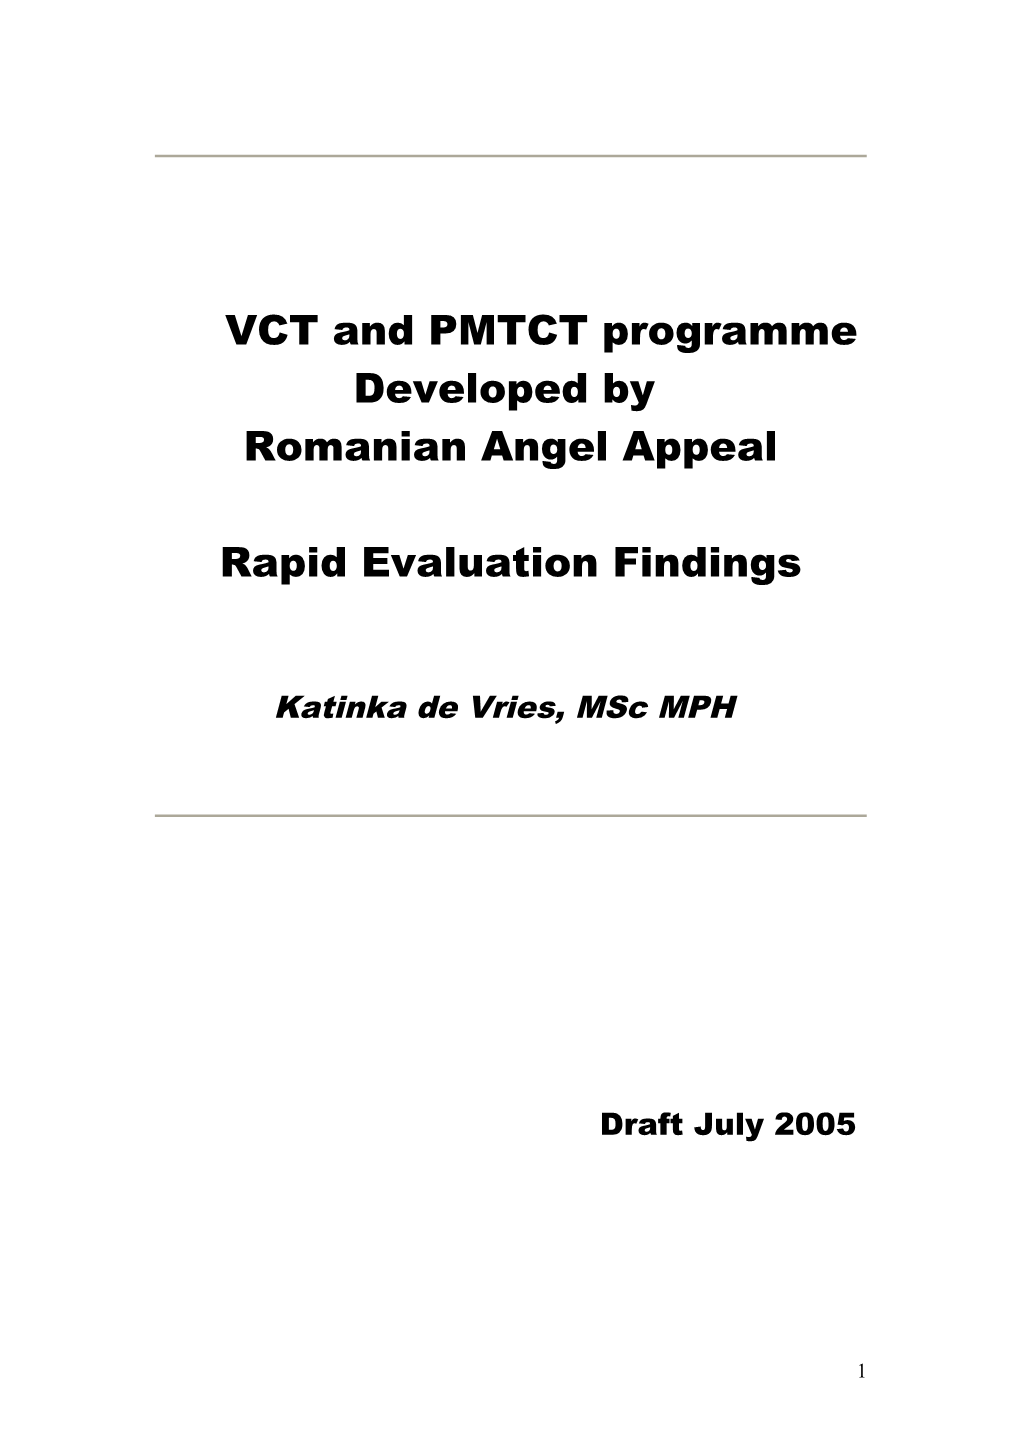 Evaluation of VCT and PMTCT Service Delivery of Romanian Angel Appeal